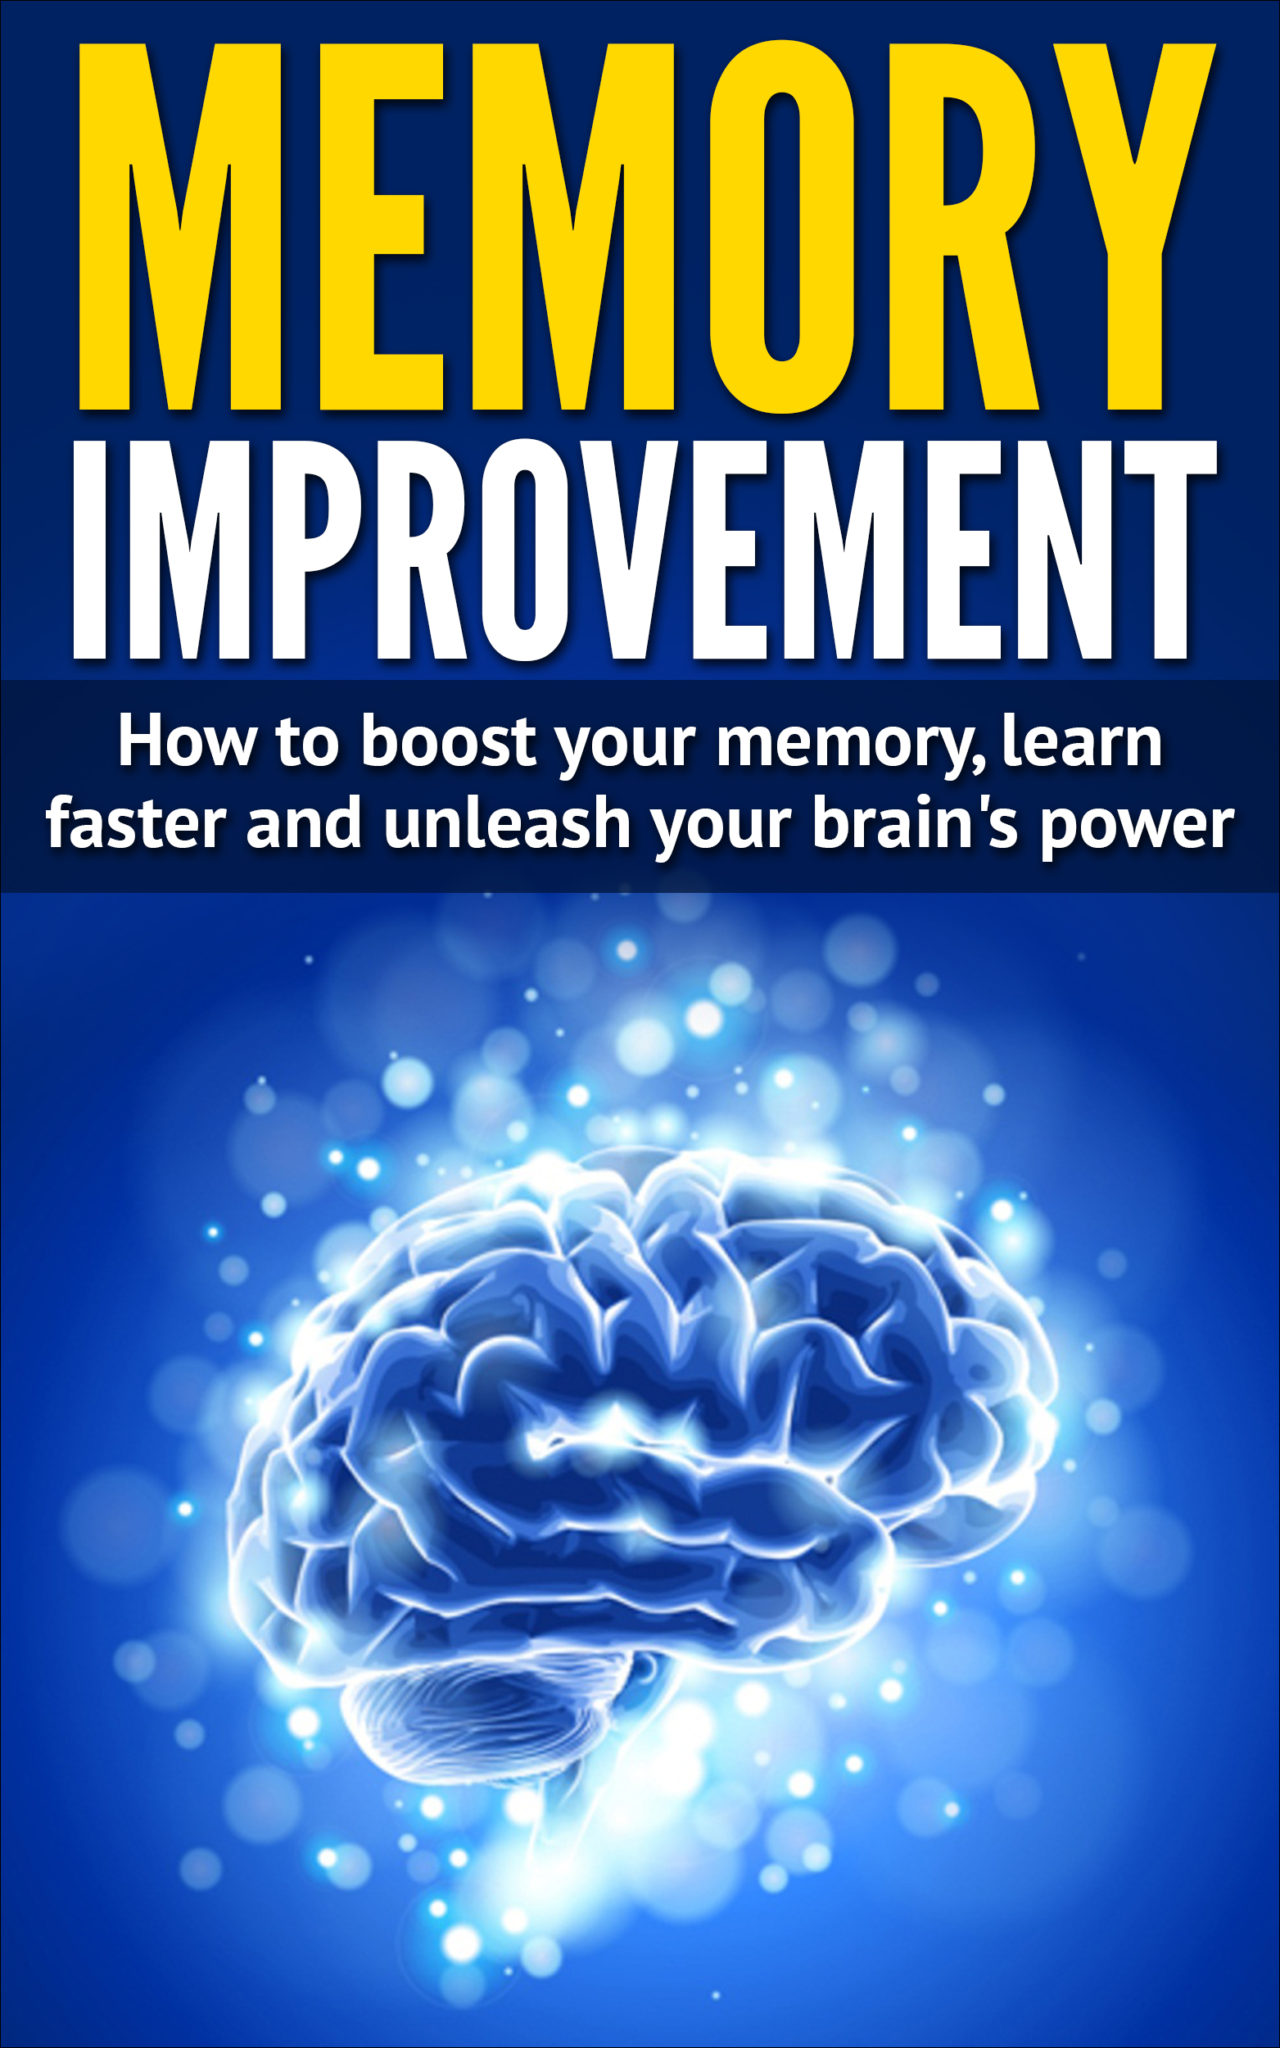 FREE: Memory Improvement: How To Boost Your Memory, Learn Faster And Unleash Your Brain’s Power by Jack J. Scott